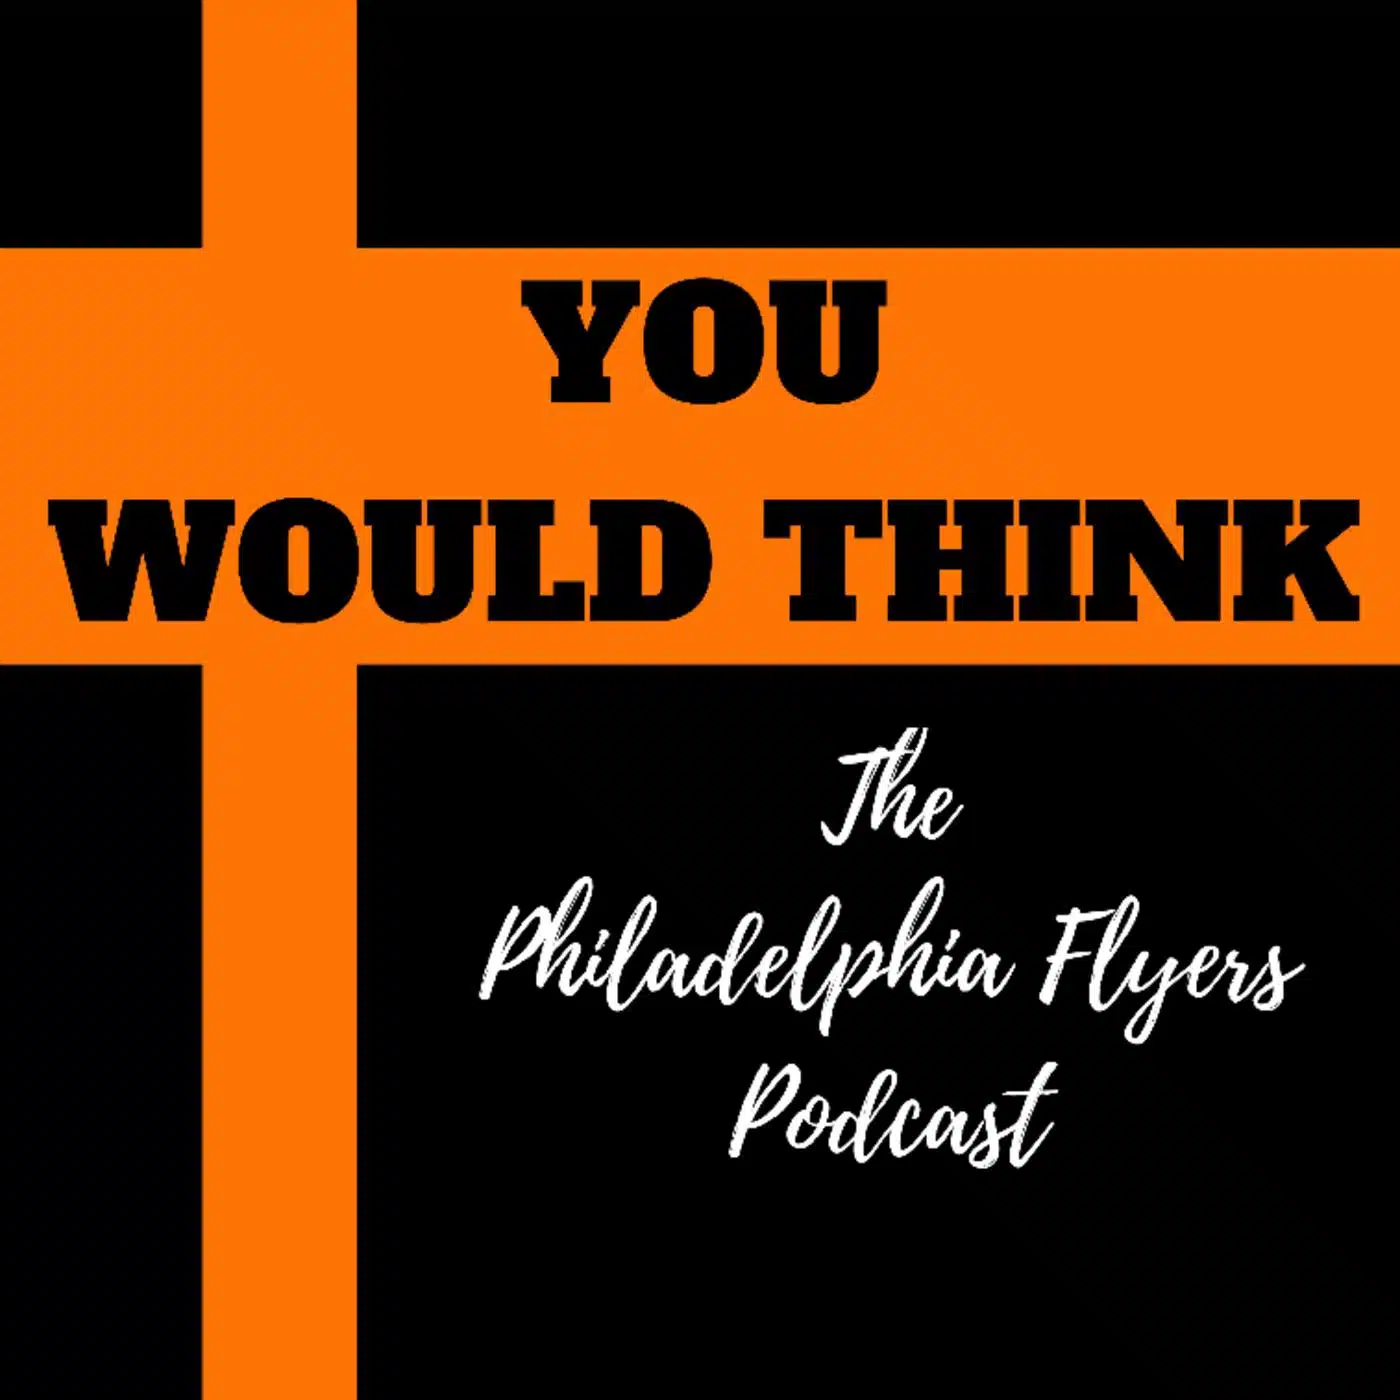 YWT: The Philadelphia Flyers Podcast – YWT #211 – Hitting A Wall?